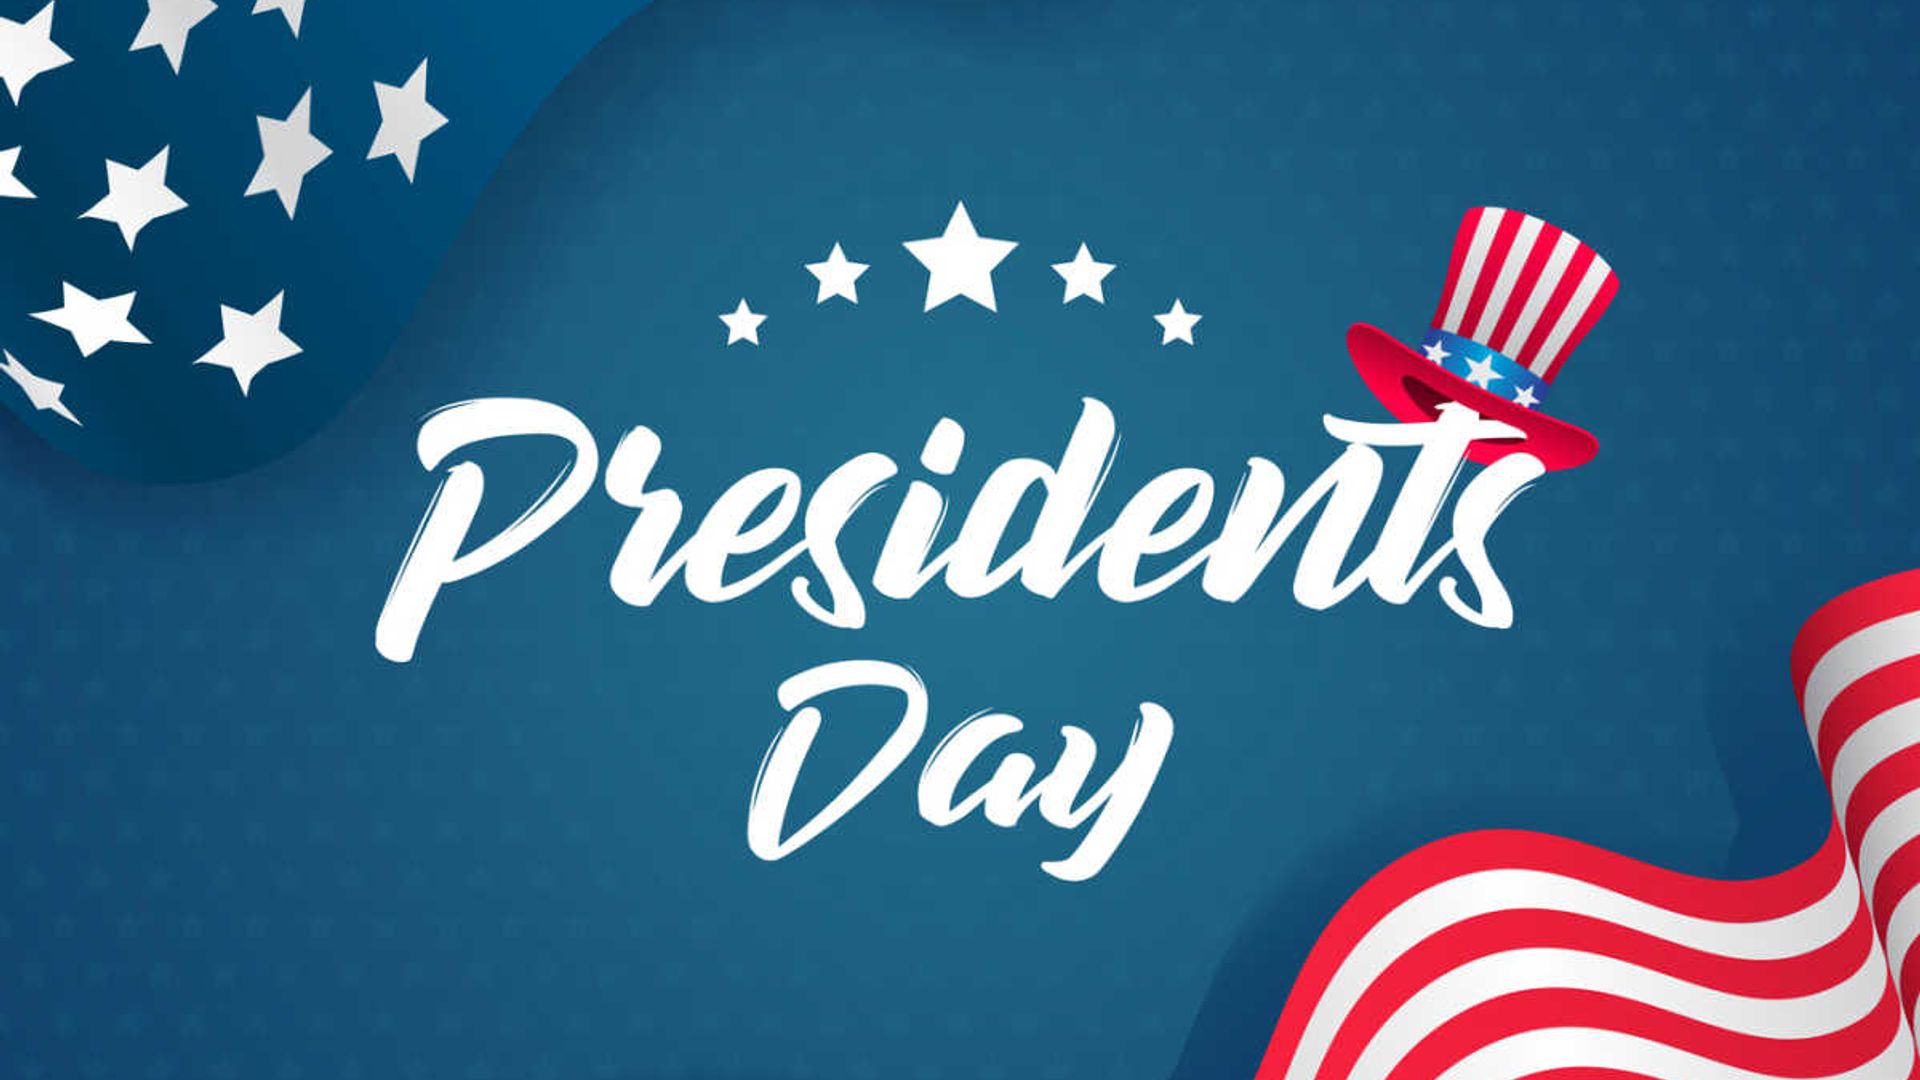 52 best Presidents Day sales to shop, from Macy's to Sephora